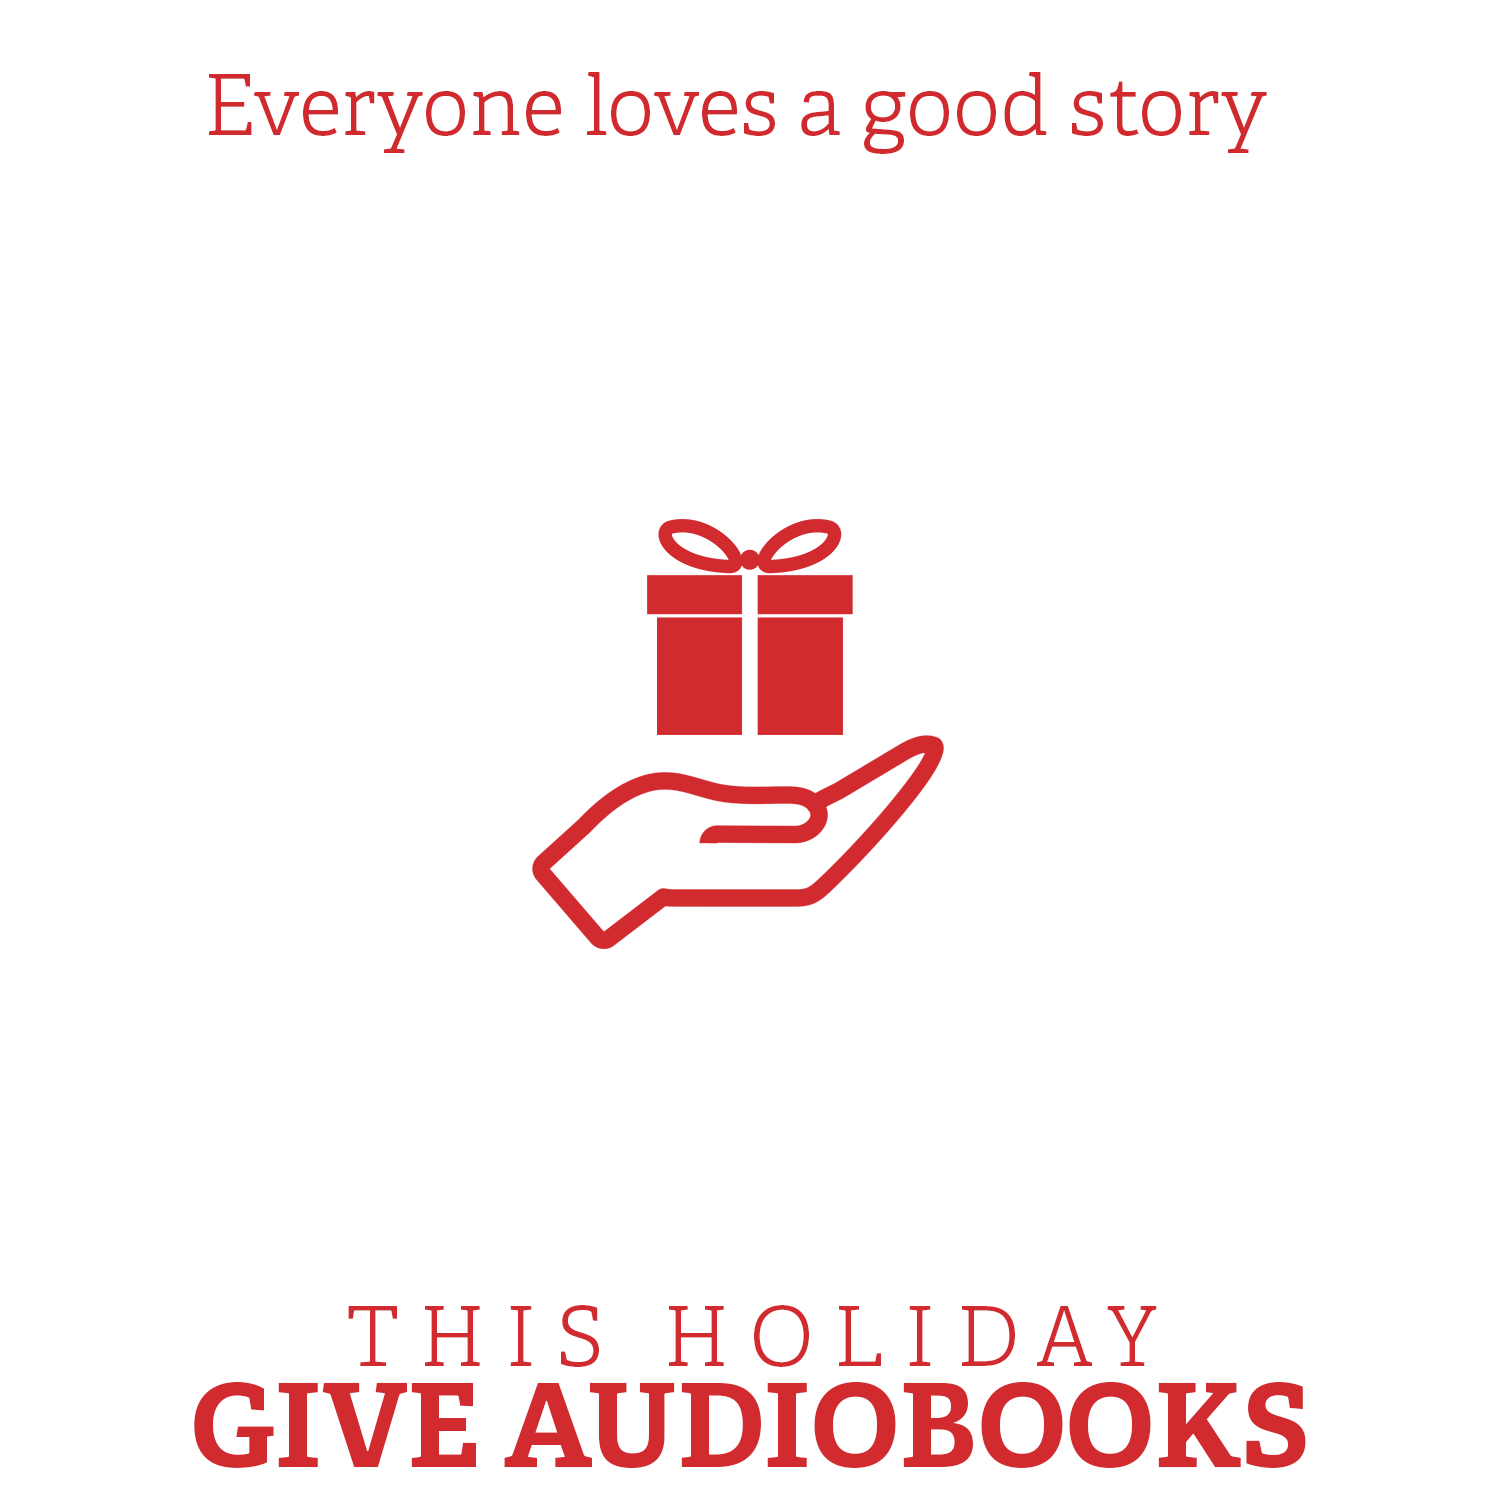 FREE Audible Audiobook Giveaways!